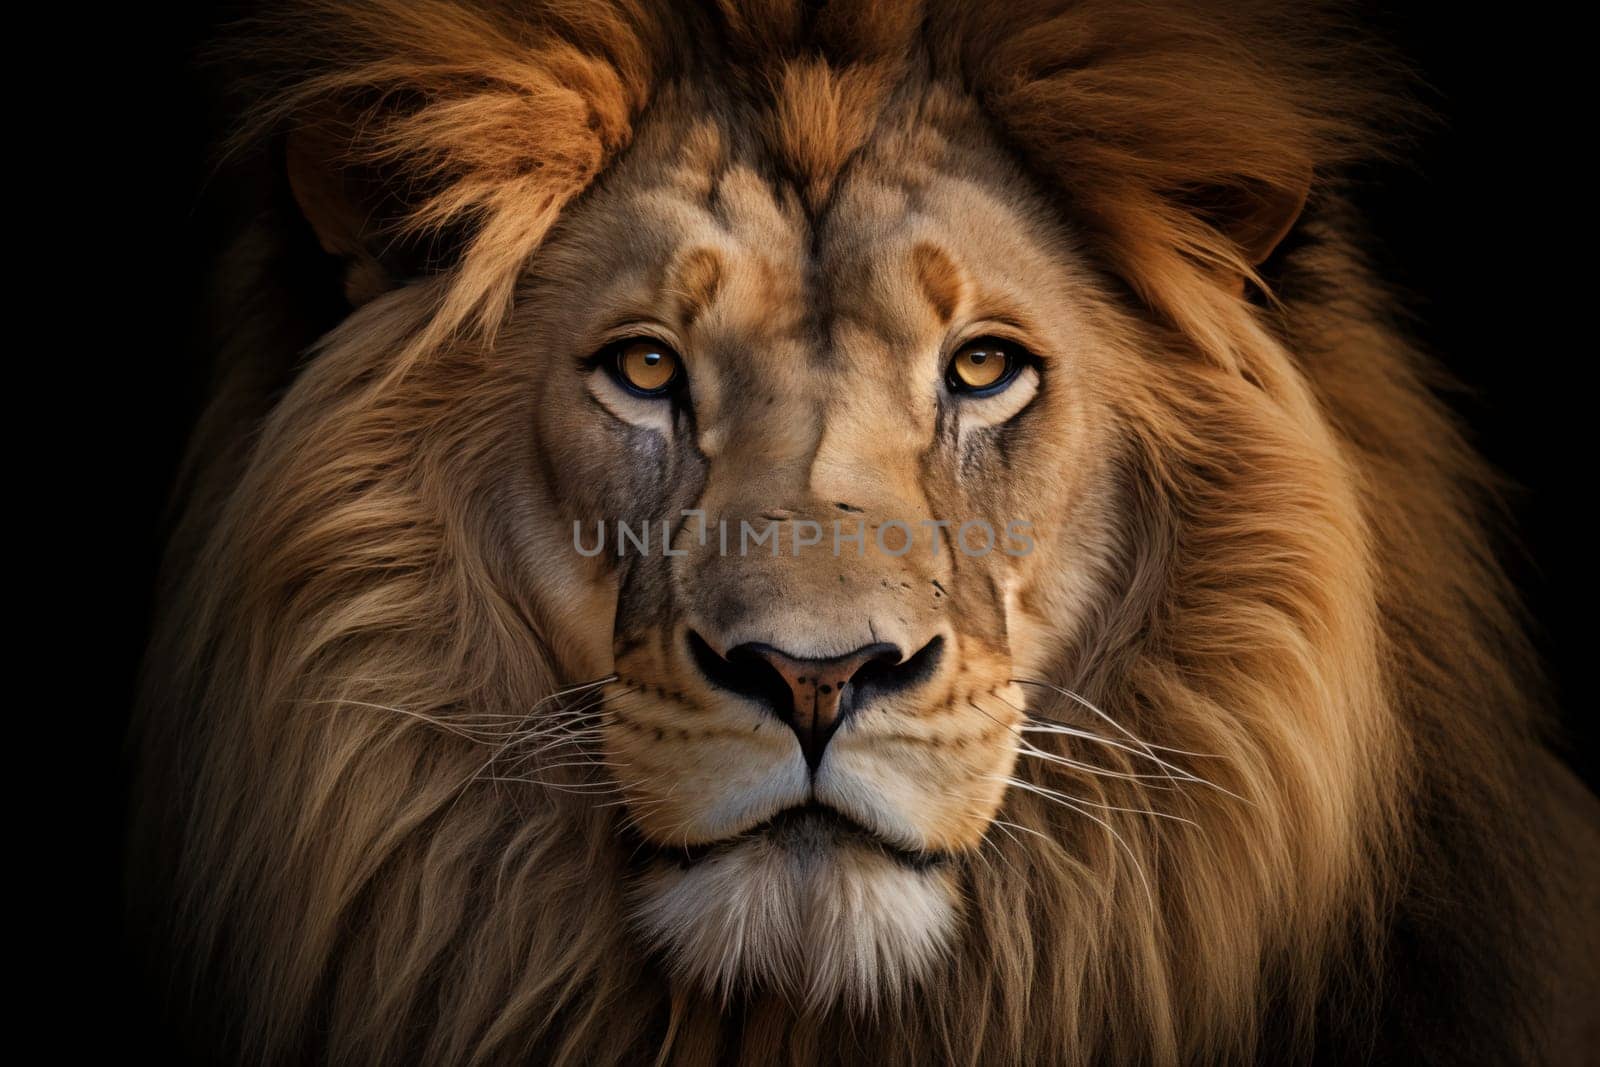 A close-up portrait of a majestic lion with a rich, golden mane, captured with high detail against a dark background